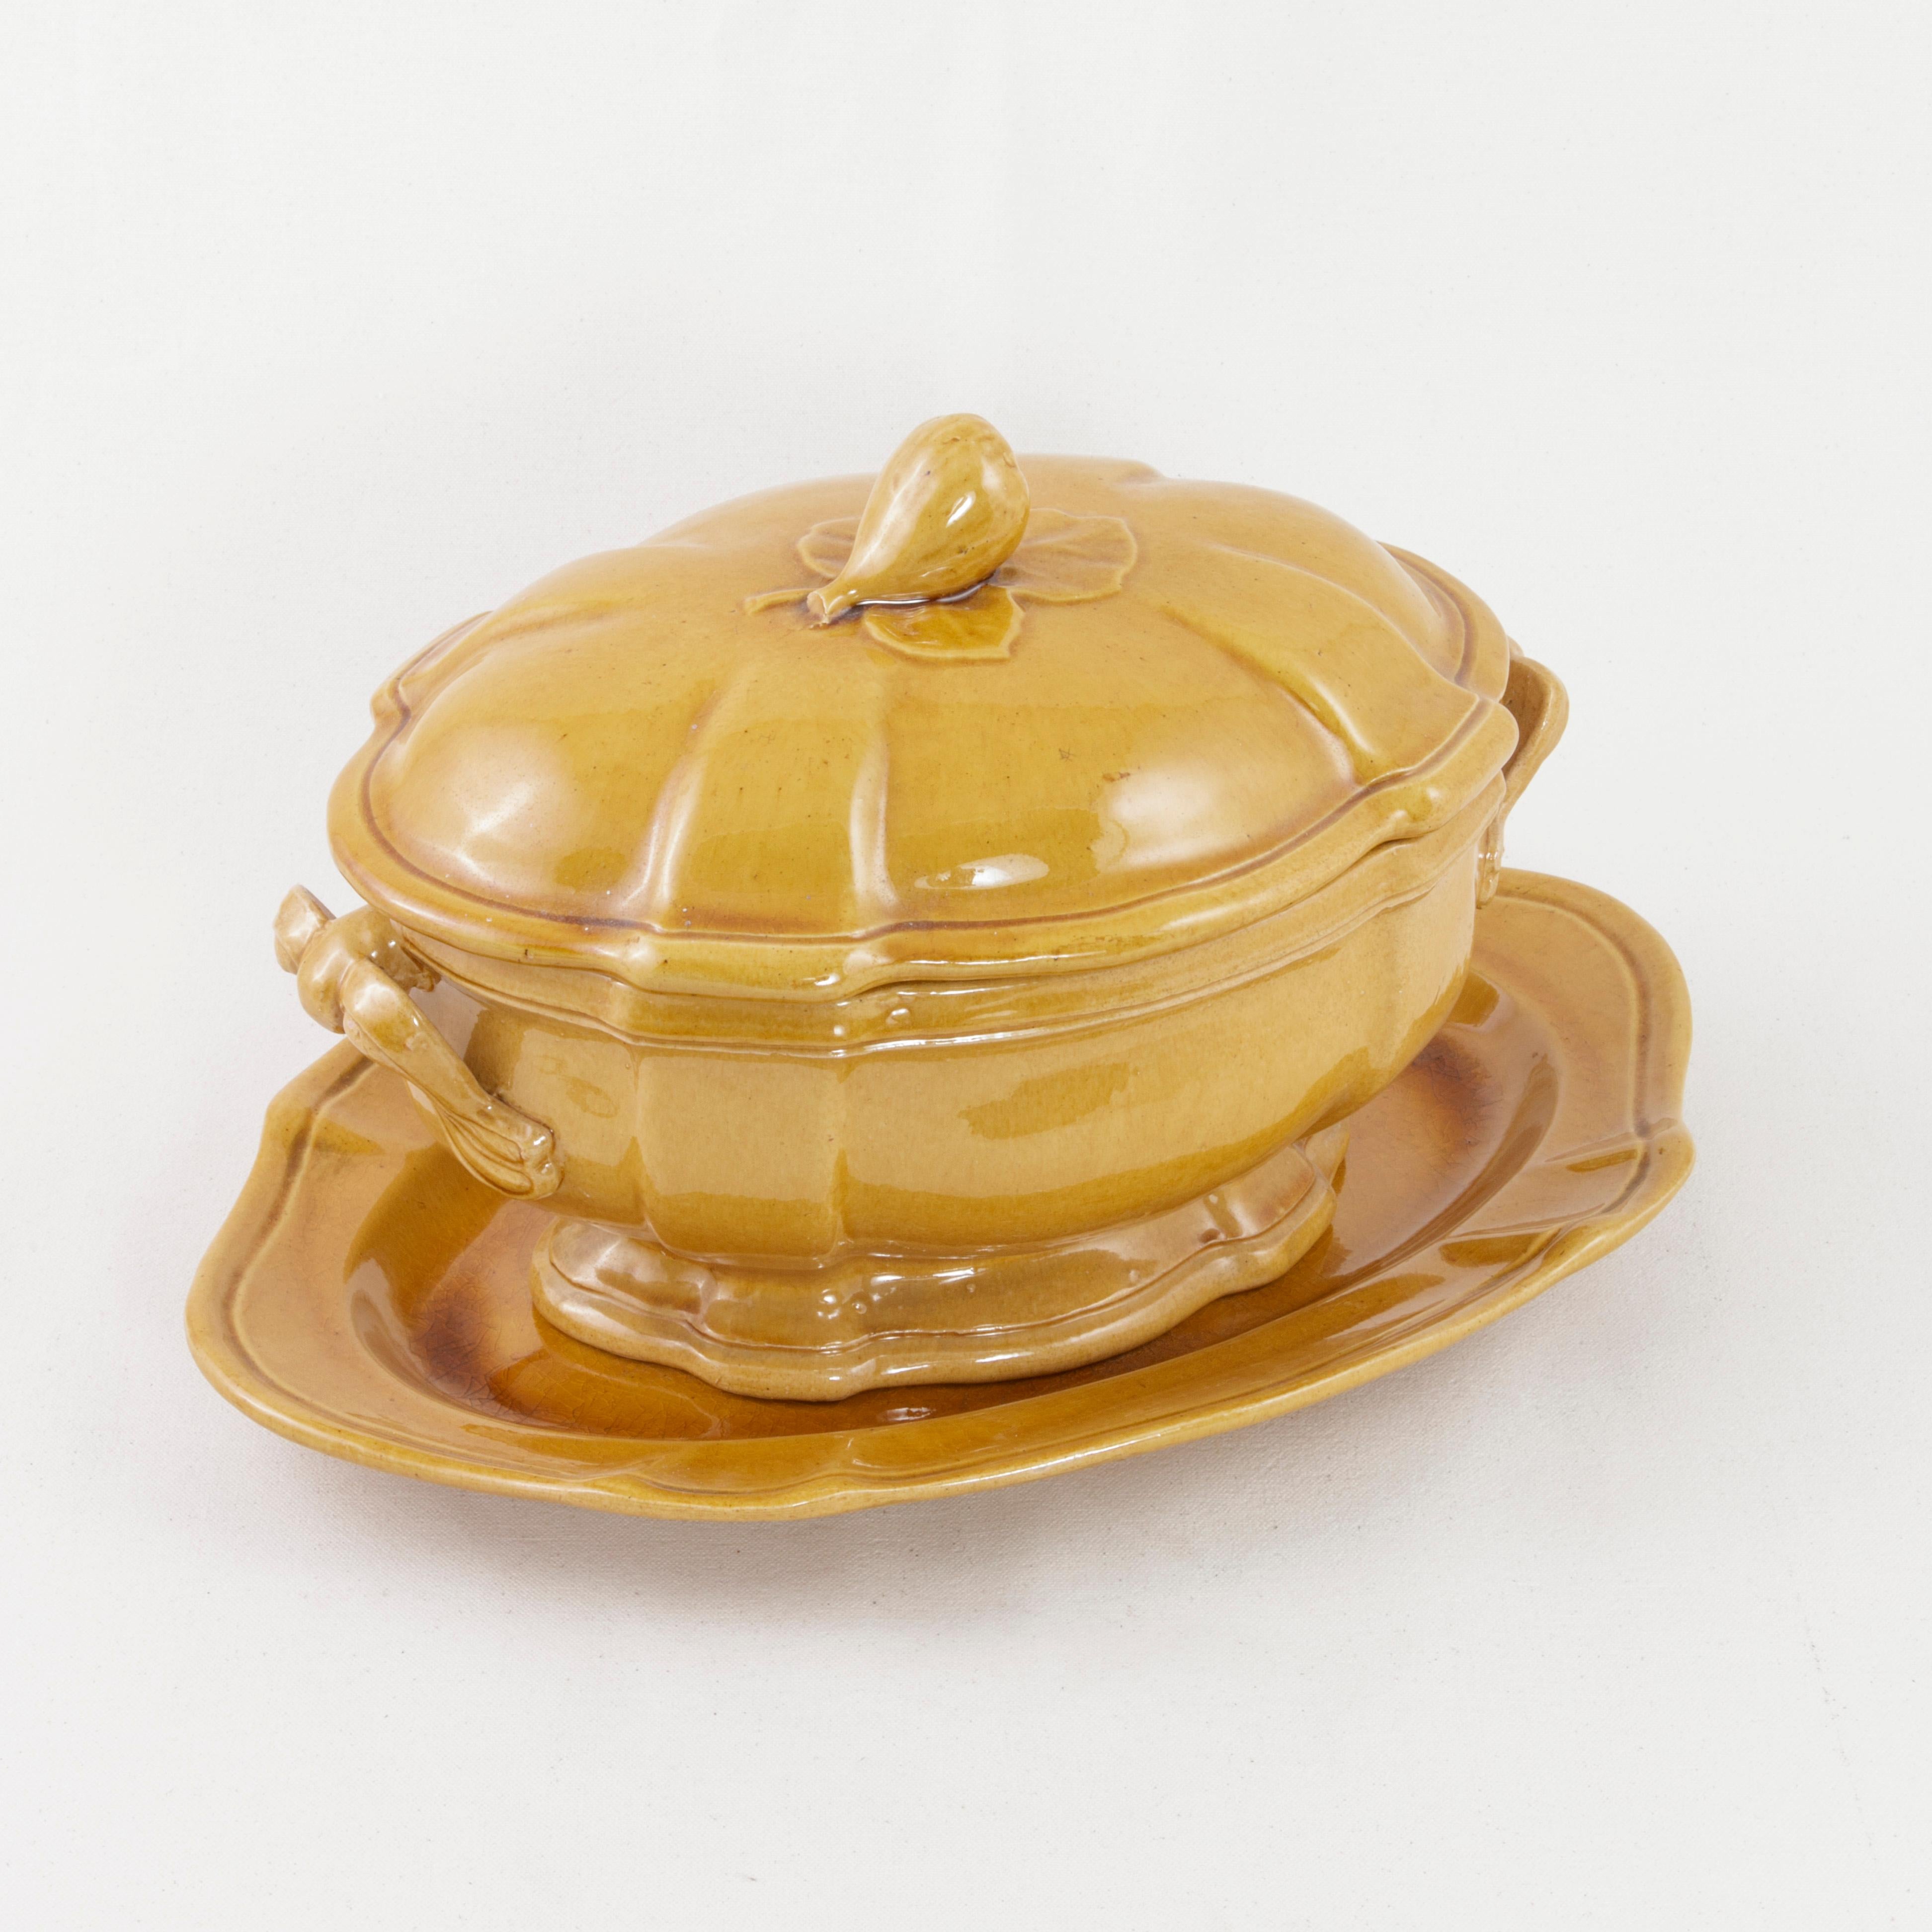 This early 20th century yellow faience soup tureen from the village of Uzès in the south of France, features its original lid and platter underneath. The lid is detailed with a fig and fig leaf handle. The tureen measures 8.75 inches in height, 12